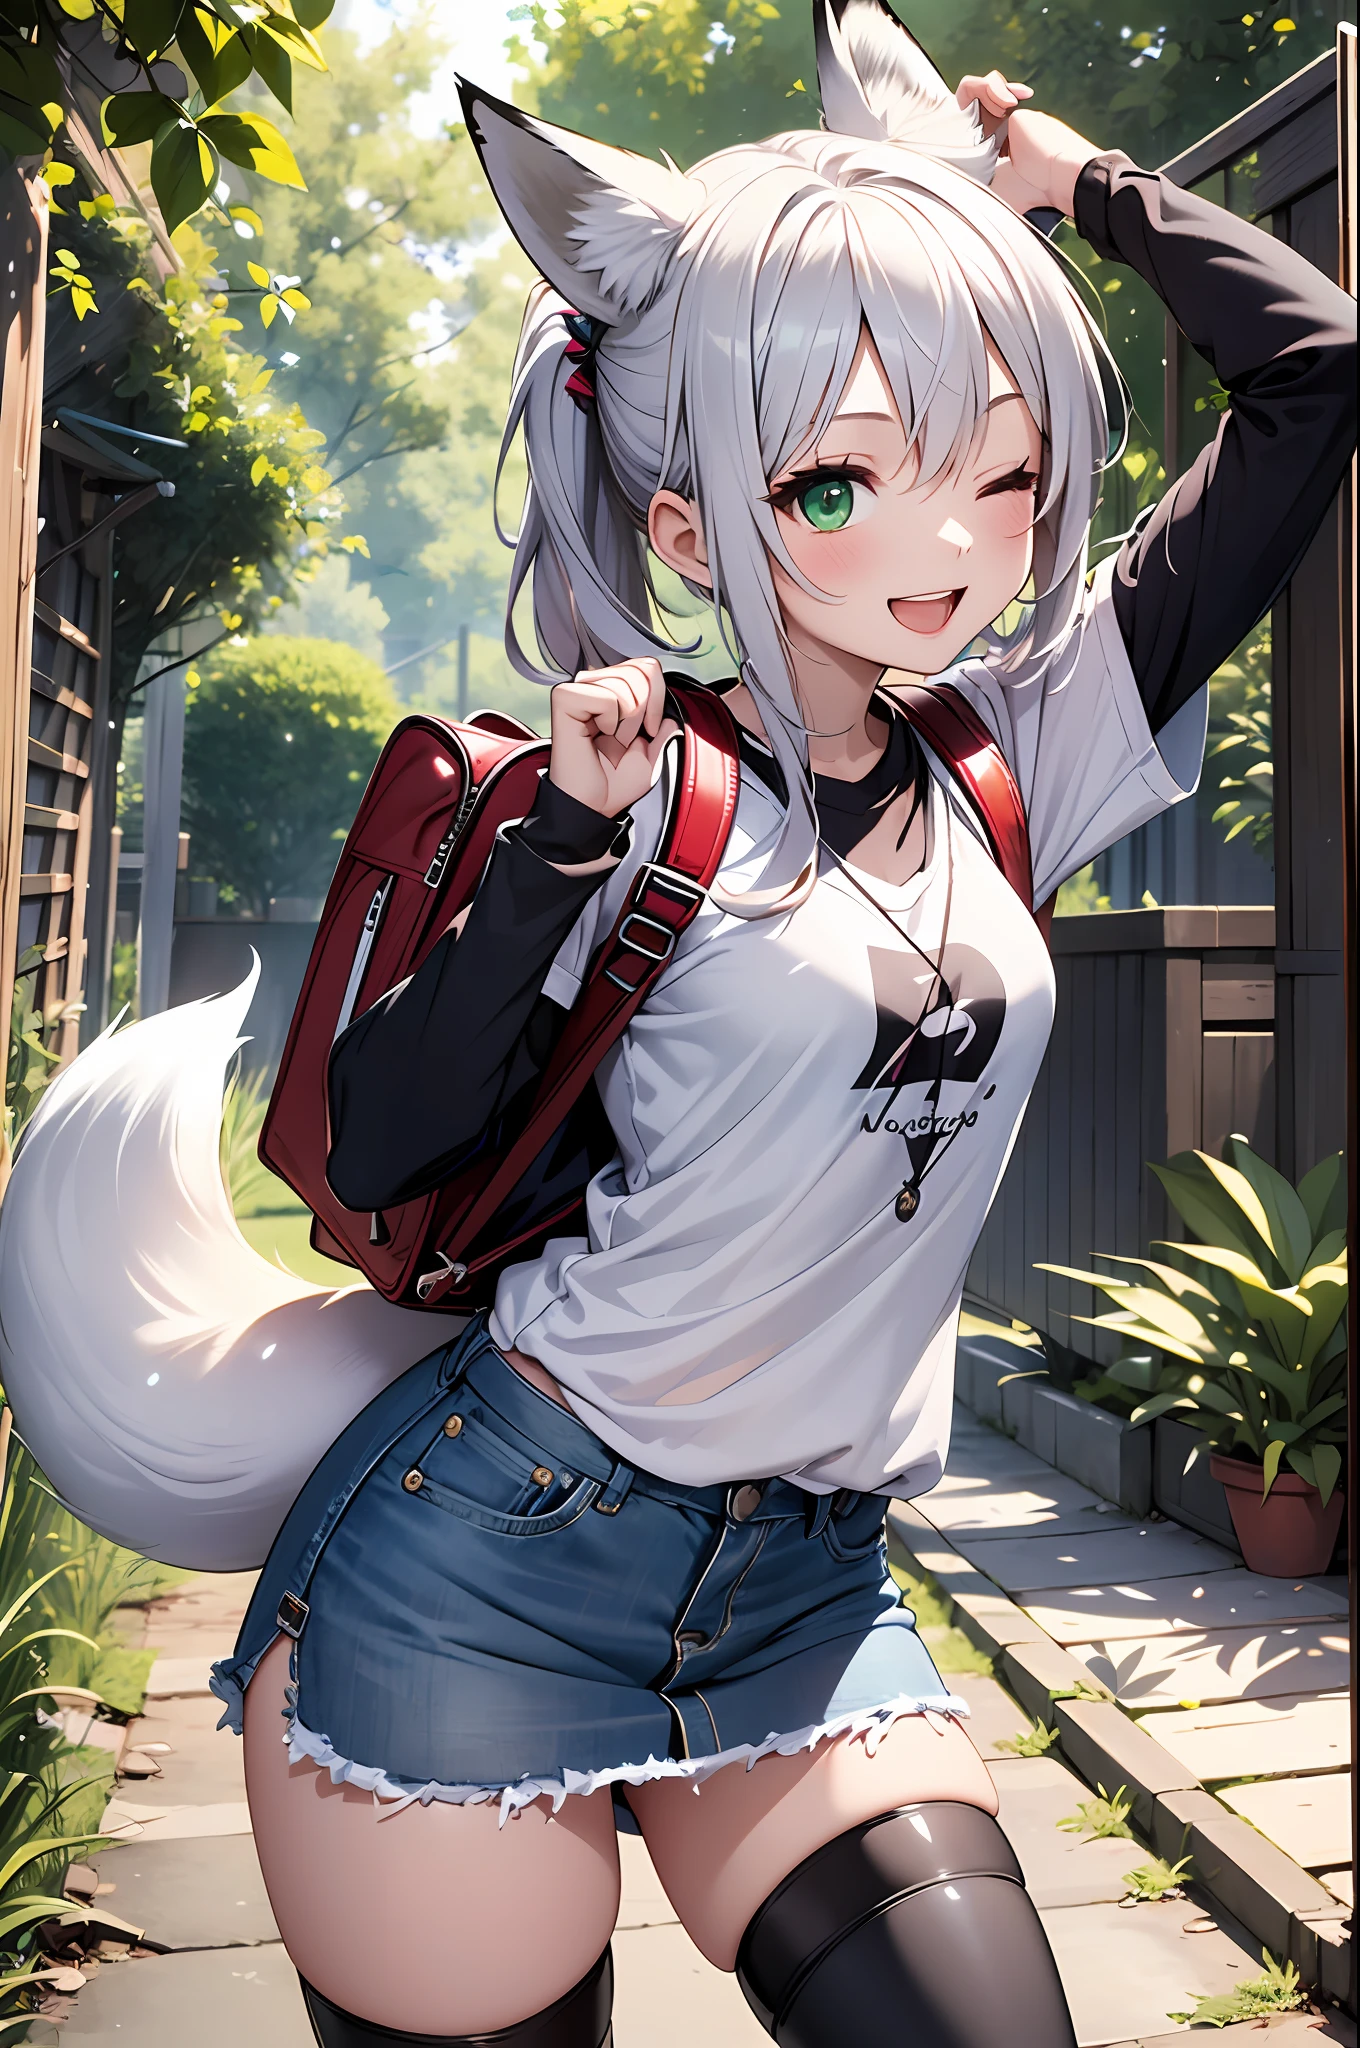 (top-quality、8K、32K、​masterpiece、UHD:1.2)、beauitful face、pov、blurry backround、10 year old beautiful girl、shinny skin, (１The fox tail of the book grows:1.3)、Beautiful silver hair、poneyTail、Deep green eyes、Fox ears、Sheer T-shirt、Denim skirt、thighs thighs thighs thighs、long boots、Carrying a backpack、Carry Case、hair adornments、raise arms、Smile with open mouth、jumpping、(beautiful nipple slips:0.9)、one eye closed、